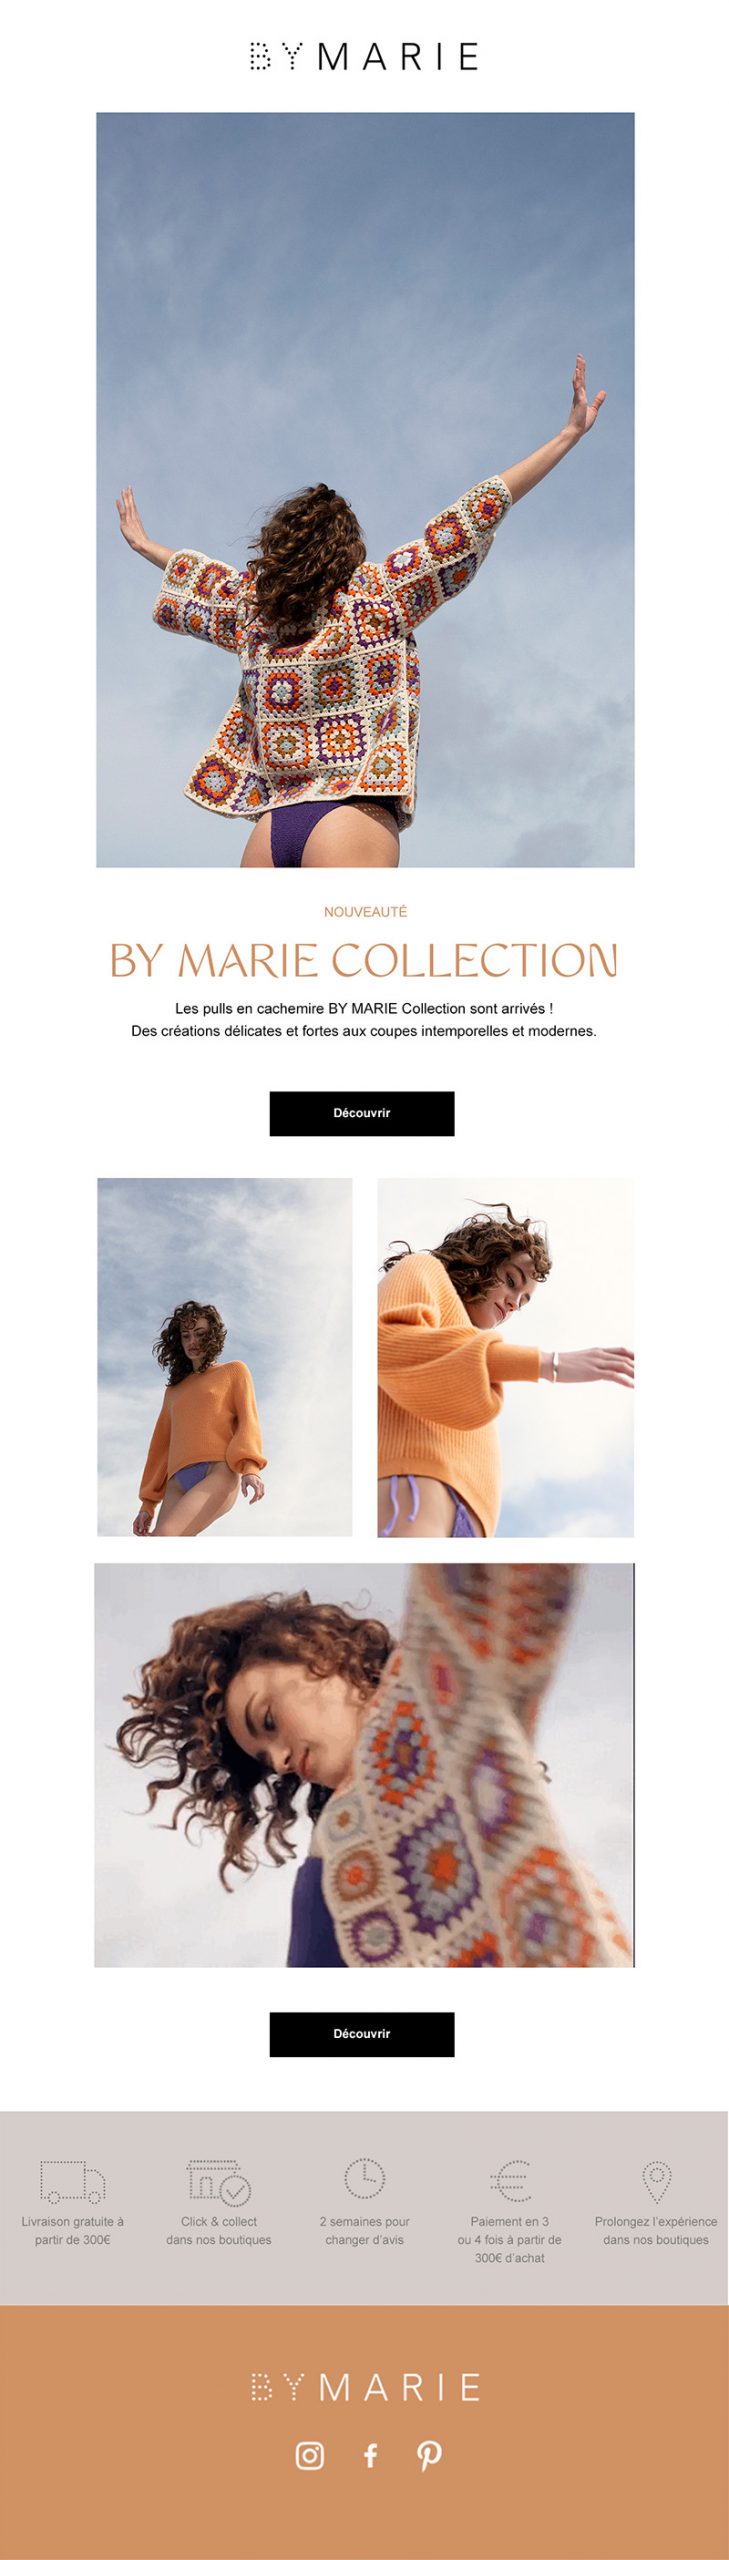 FR_NL BY MARIE COLLECTION 800px